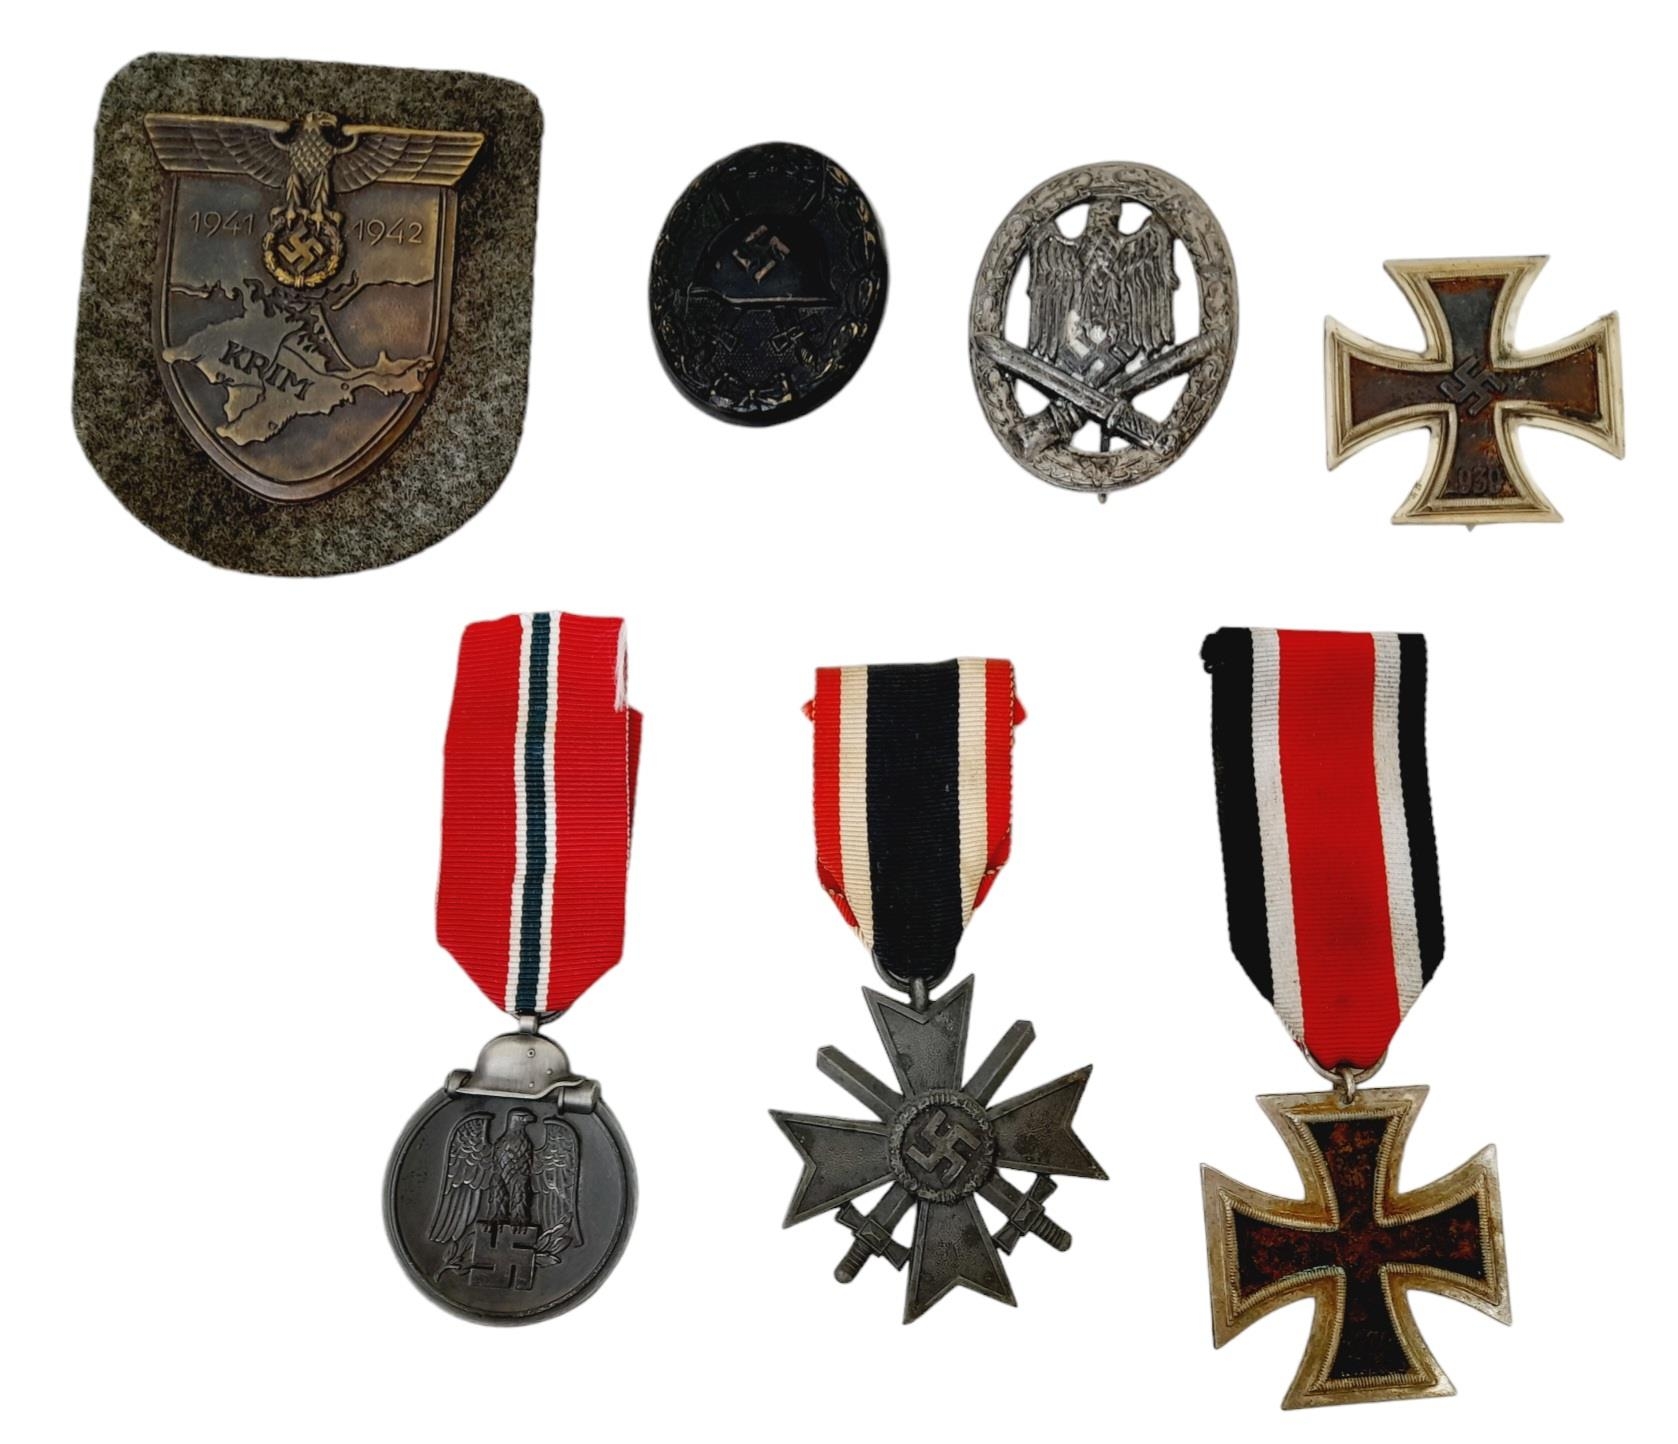 WW2 German Wehrpass & Awards to Leutnant Alfons Macowiak who served with several Panzerjäger (Tank - Image 2 of 4